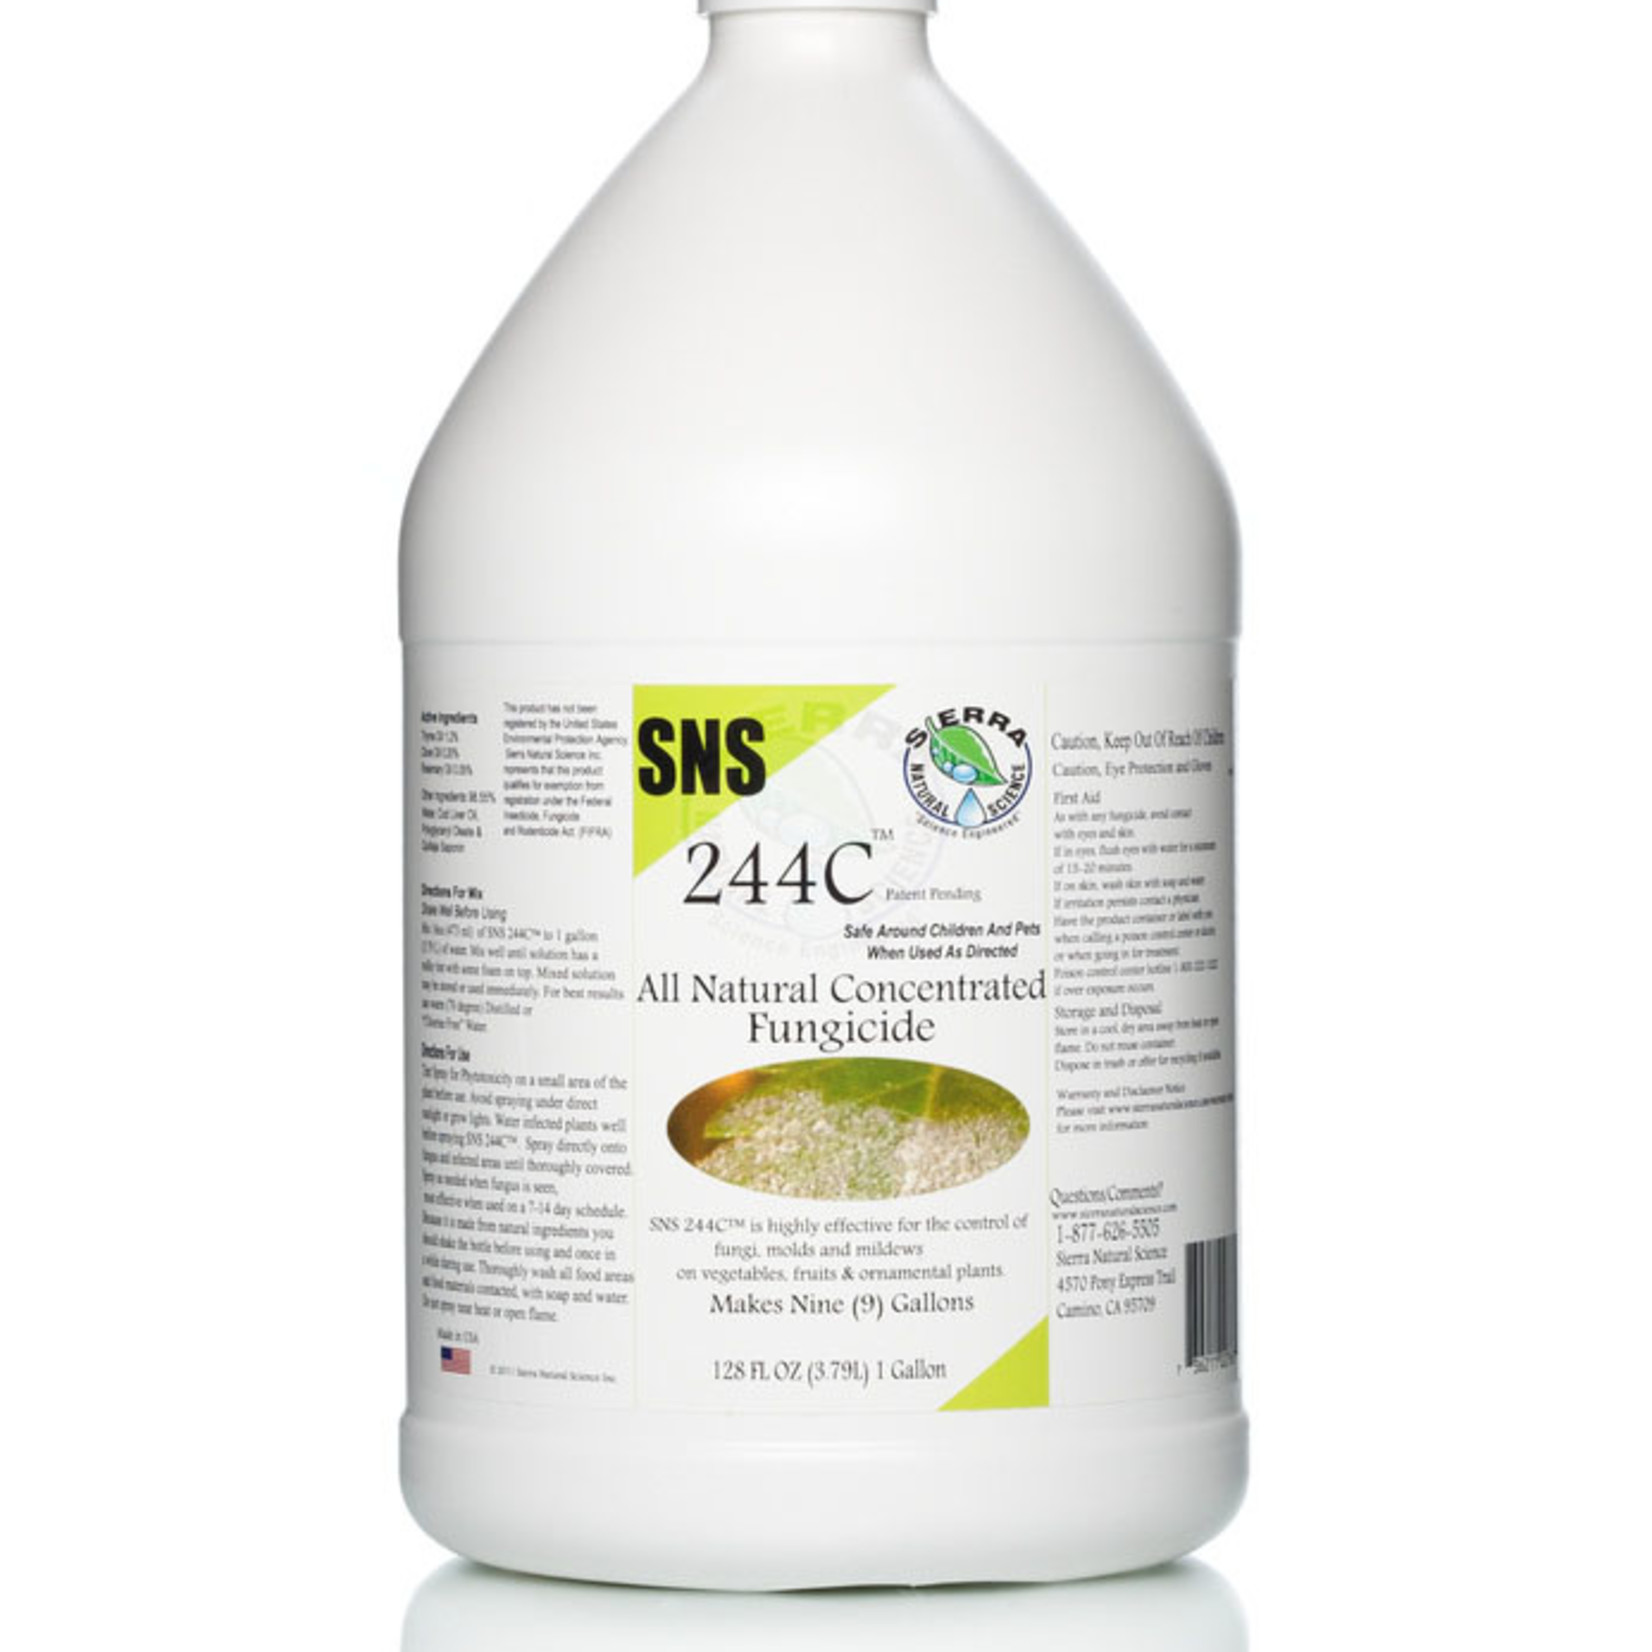 Sierra Natural Science SNS 244C Fungicide Concentrate, 1 gal